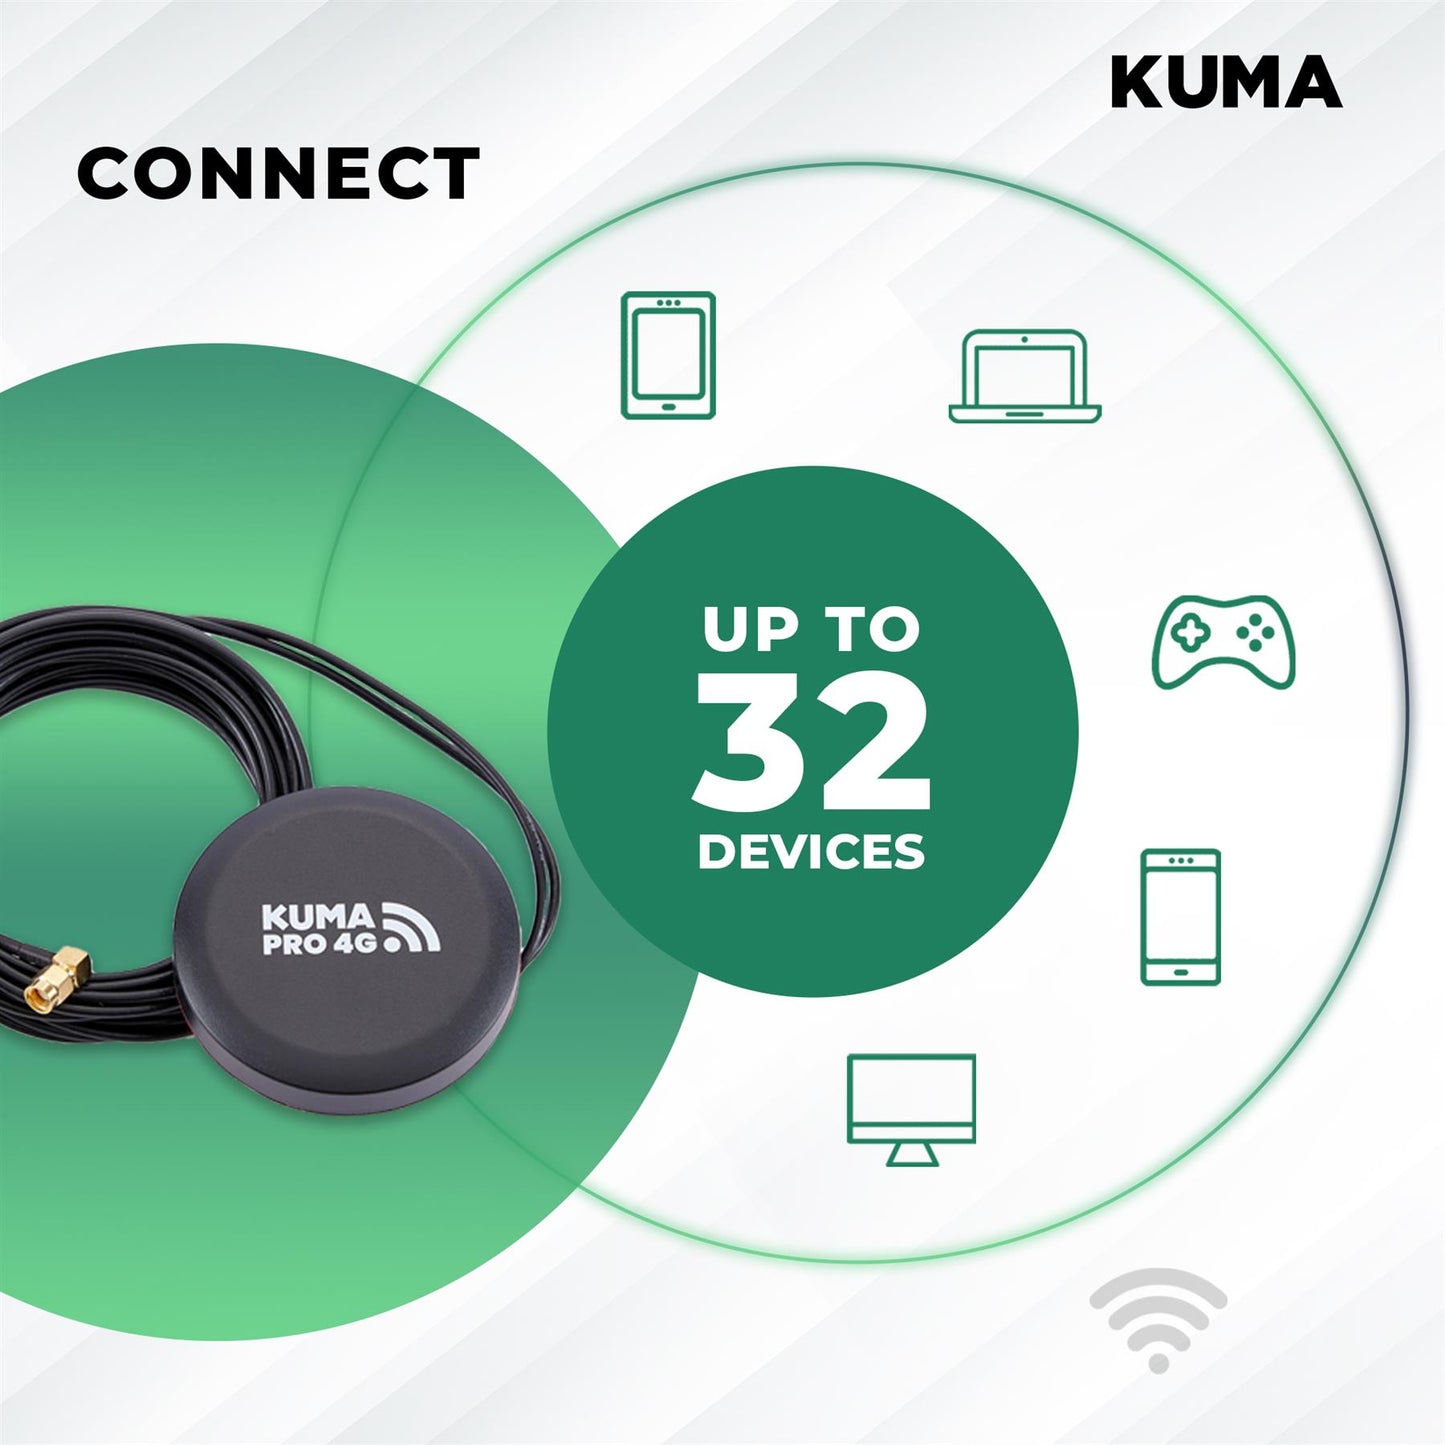 KUMA CONNECT PRO - SIM Unlocked LiTE 4G Router and Roof Mount PRO Antenna - Turn 4G LTE Signal into WiFi Internet Hotspot for House Garden Office Caravan Motorhome Boat - Wireless Device Booster Kit